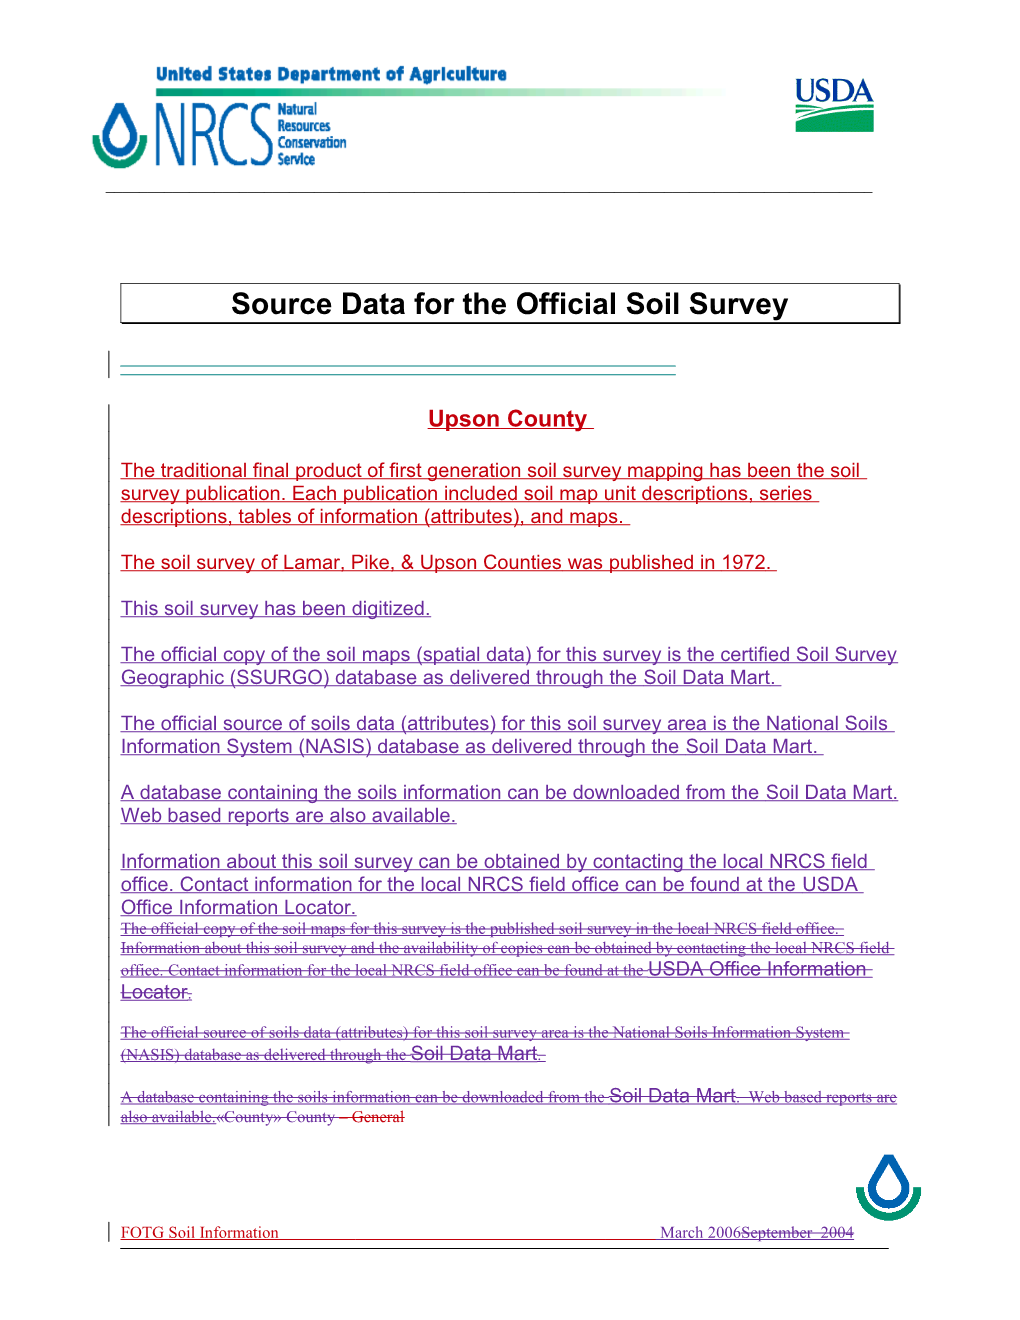 Source Data for the Official Soil Survey